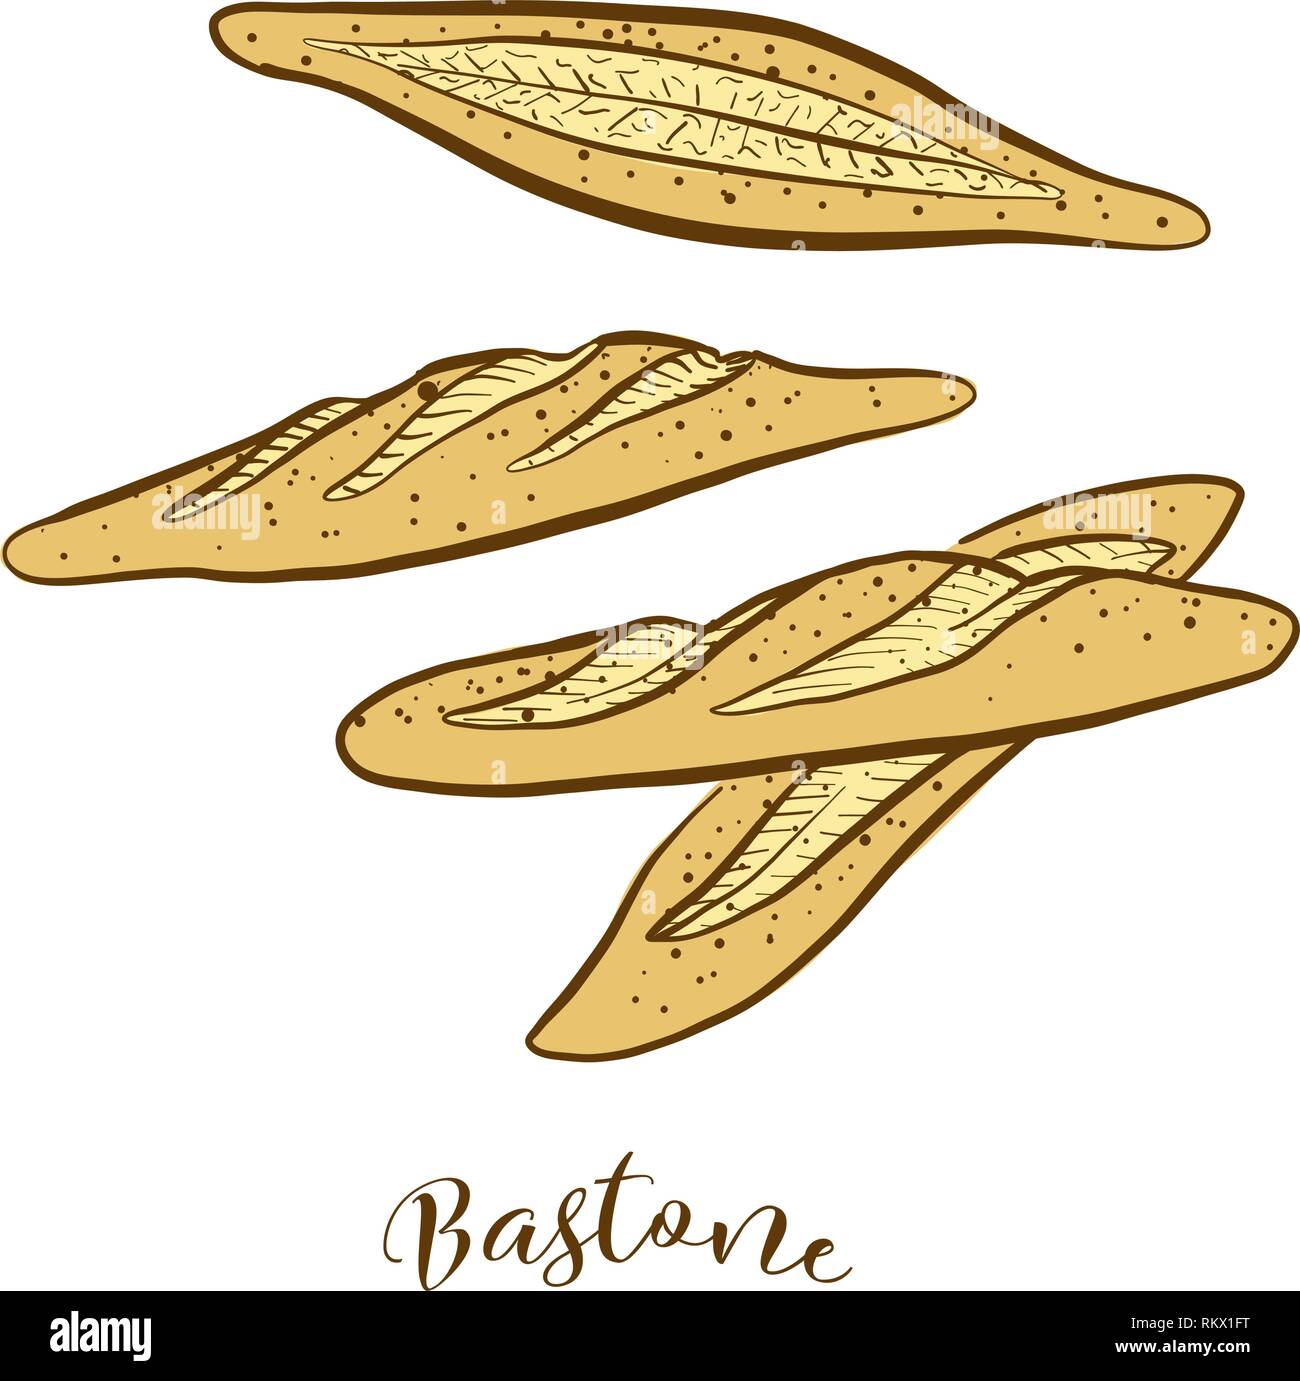 Colored sketches of Bastone bread. Vector drawing of Yeast bread food, usually known in Italy. Colored Bread illustration series. Stock Vector